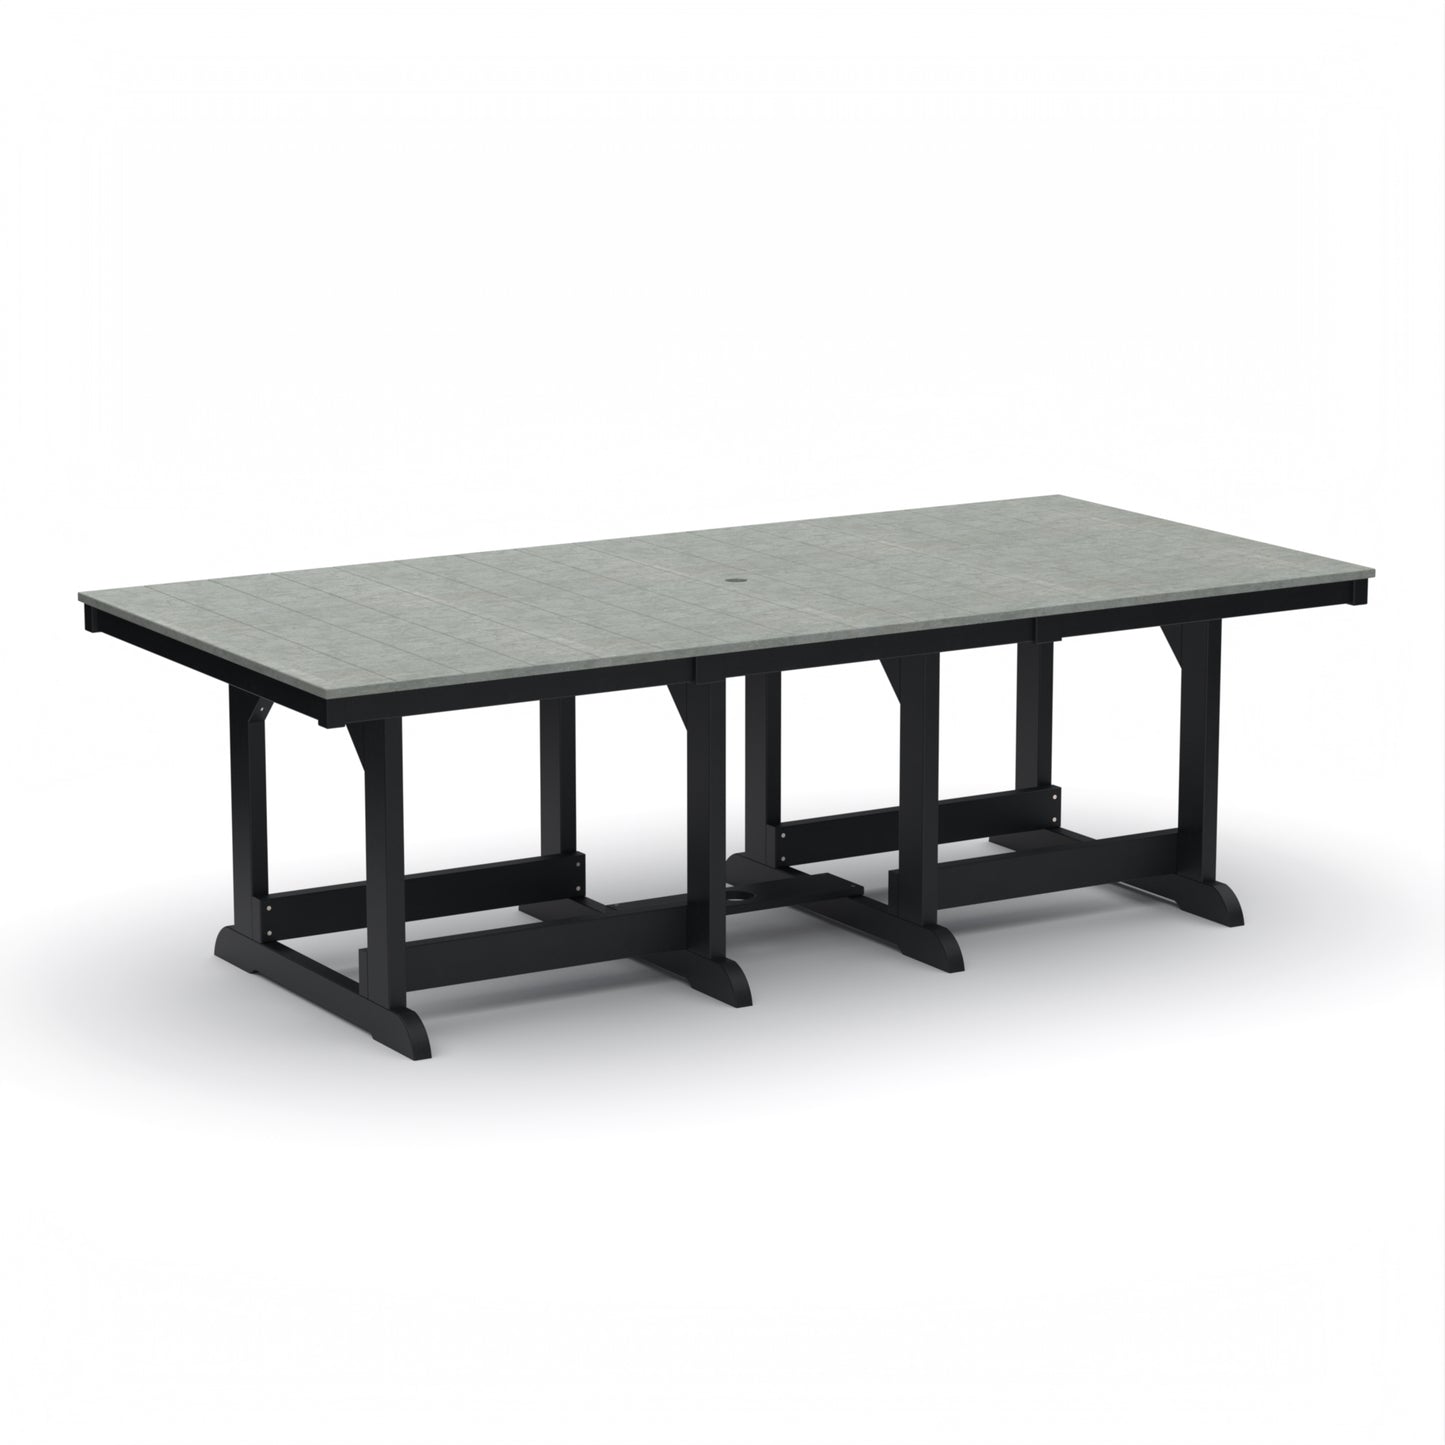 Wildridge Recycled Plastic Heritage Outdoor Dining Table 44x94 - LEAD TIME TO SHIP 6 WEEKS OR LESS